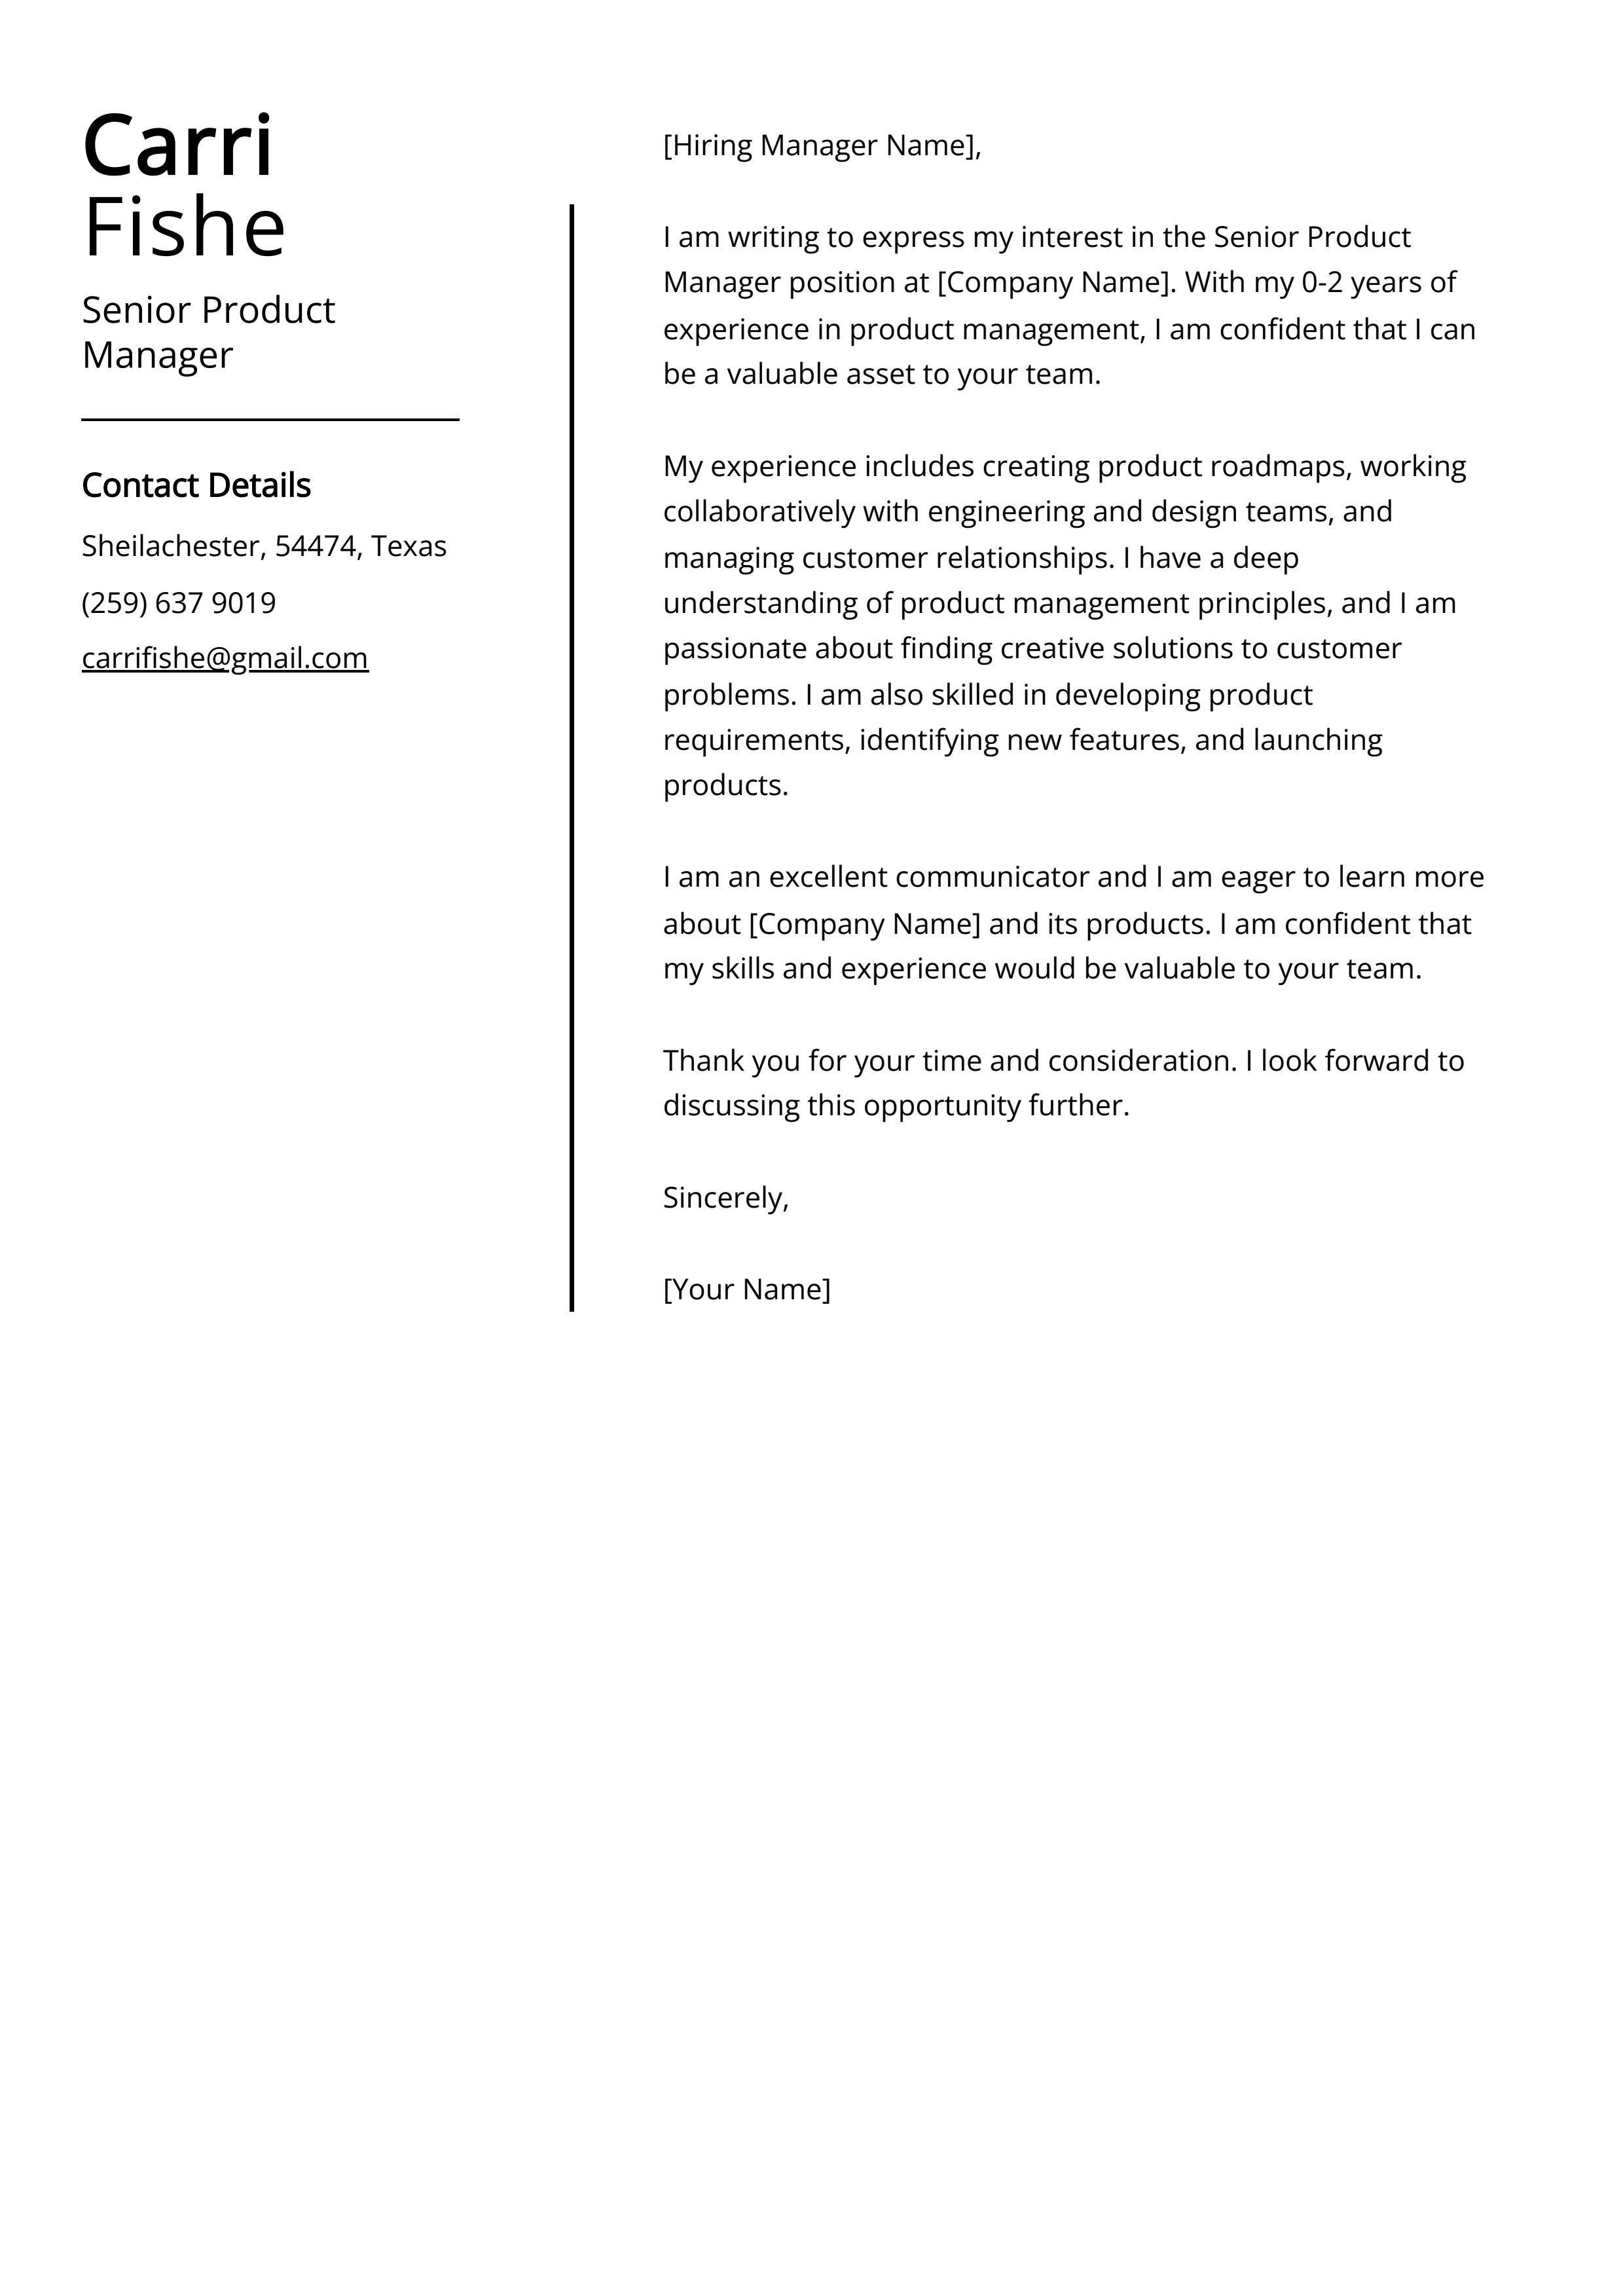 Senior Product Manager Cover Letter Example